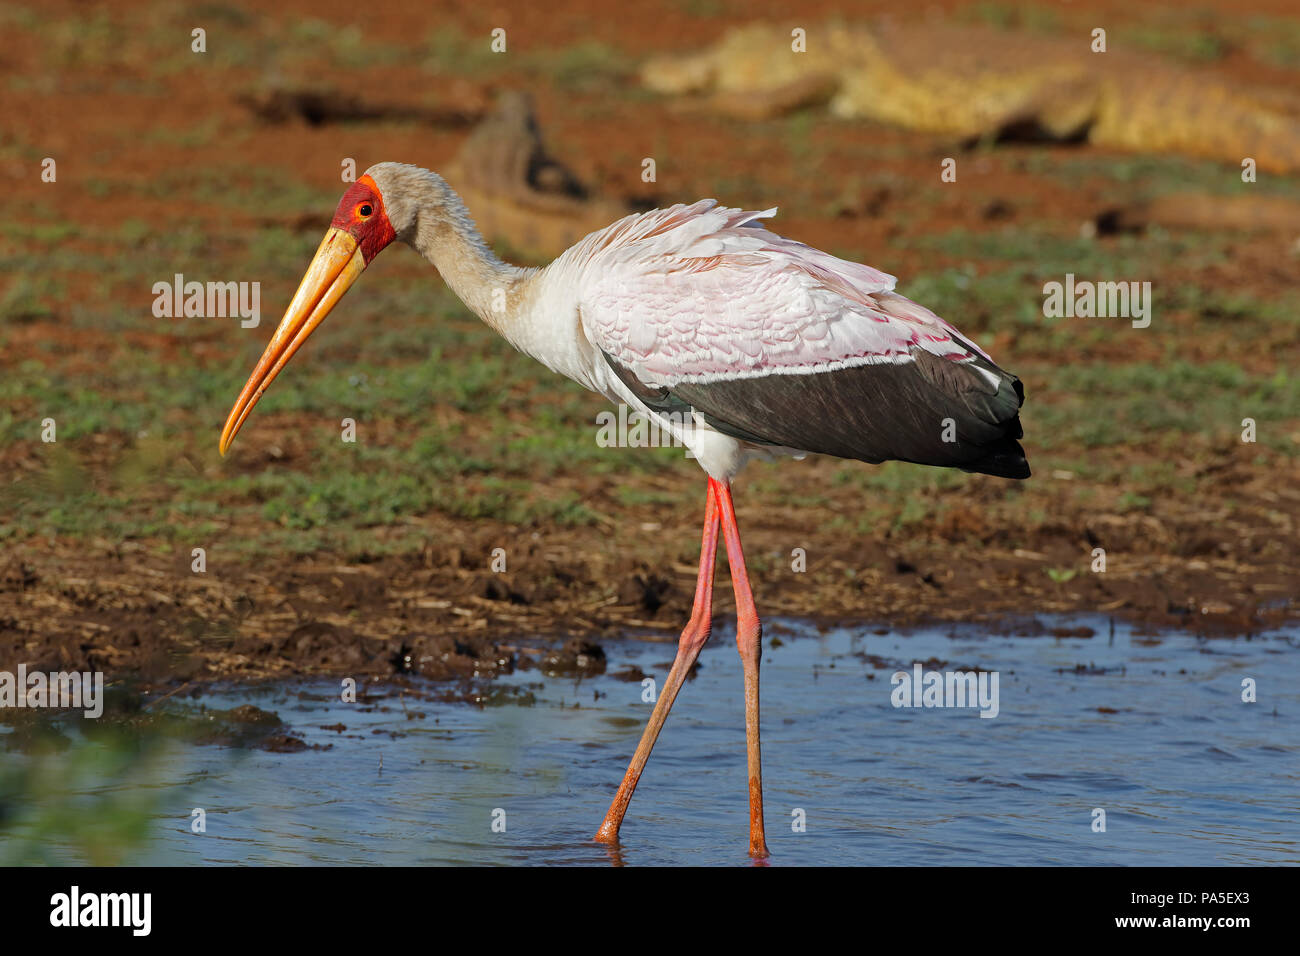 Yellow-billed stork (Mycteria ibis) foraging in shallow water, Kruger National Park, South Africa Stock Photo